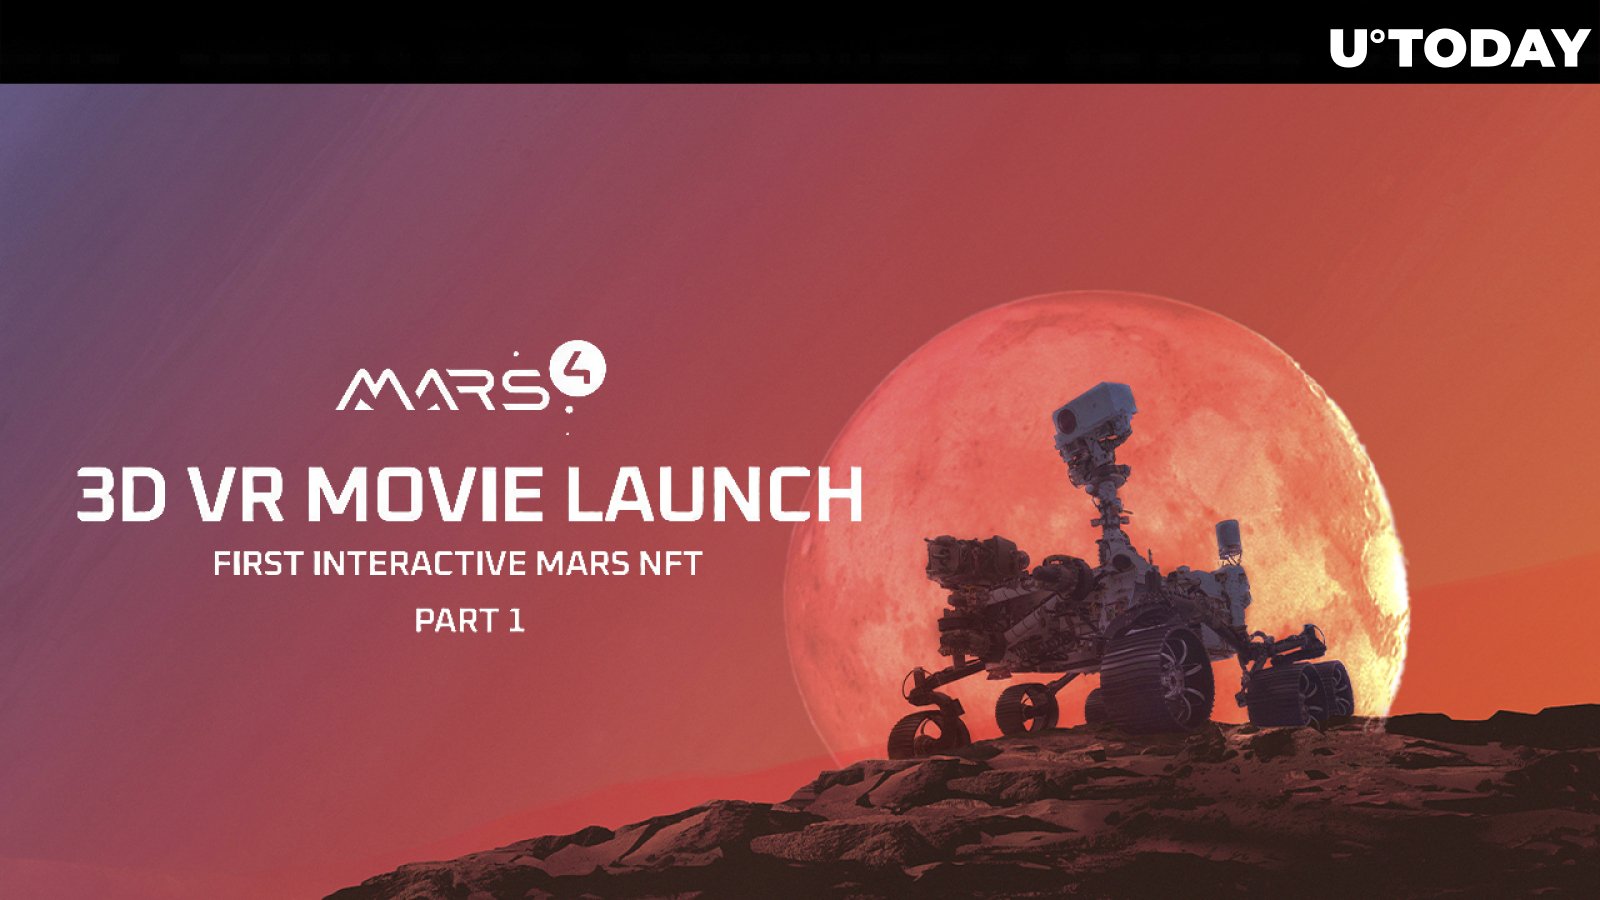 Mars4 to Release First Interactive NFT in Form of VR Movie on Mars